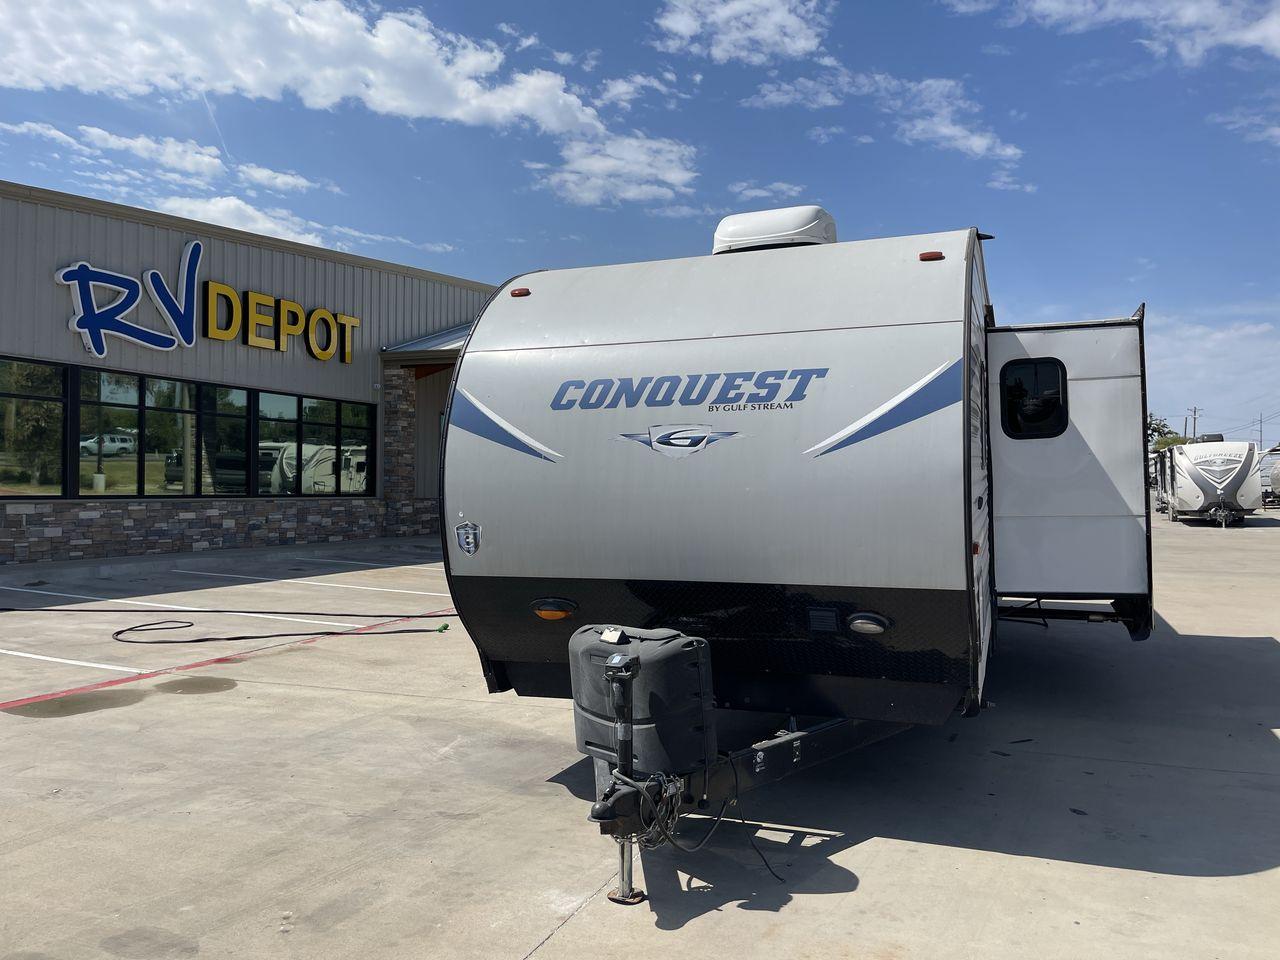 2019 WHITE GULFSTREAM CONQUEST 301TB (1NL1G3421K1) , Length: 34.08 ft. | Dry Weight: 6,845 lbs. | Slides: 1 transmission, located at 4319 N Main St, Cleburne, TX, 76033, (817) 678-5133, 32.385960, -97.391212 - The 2019 Gulf Stream Conquest 301TB travel trailer will help you prepare for your next vacation. This well-thought-out, kid-friendly RV is your ticket to enjoyable and unique camping trips. The dimensions of this unit are 34.08 ft in length, 8 ft in width, and 10.75 ft in height. It has a dry weight - Photo #0